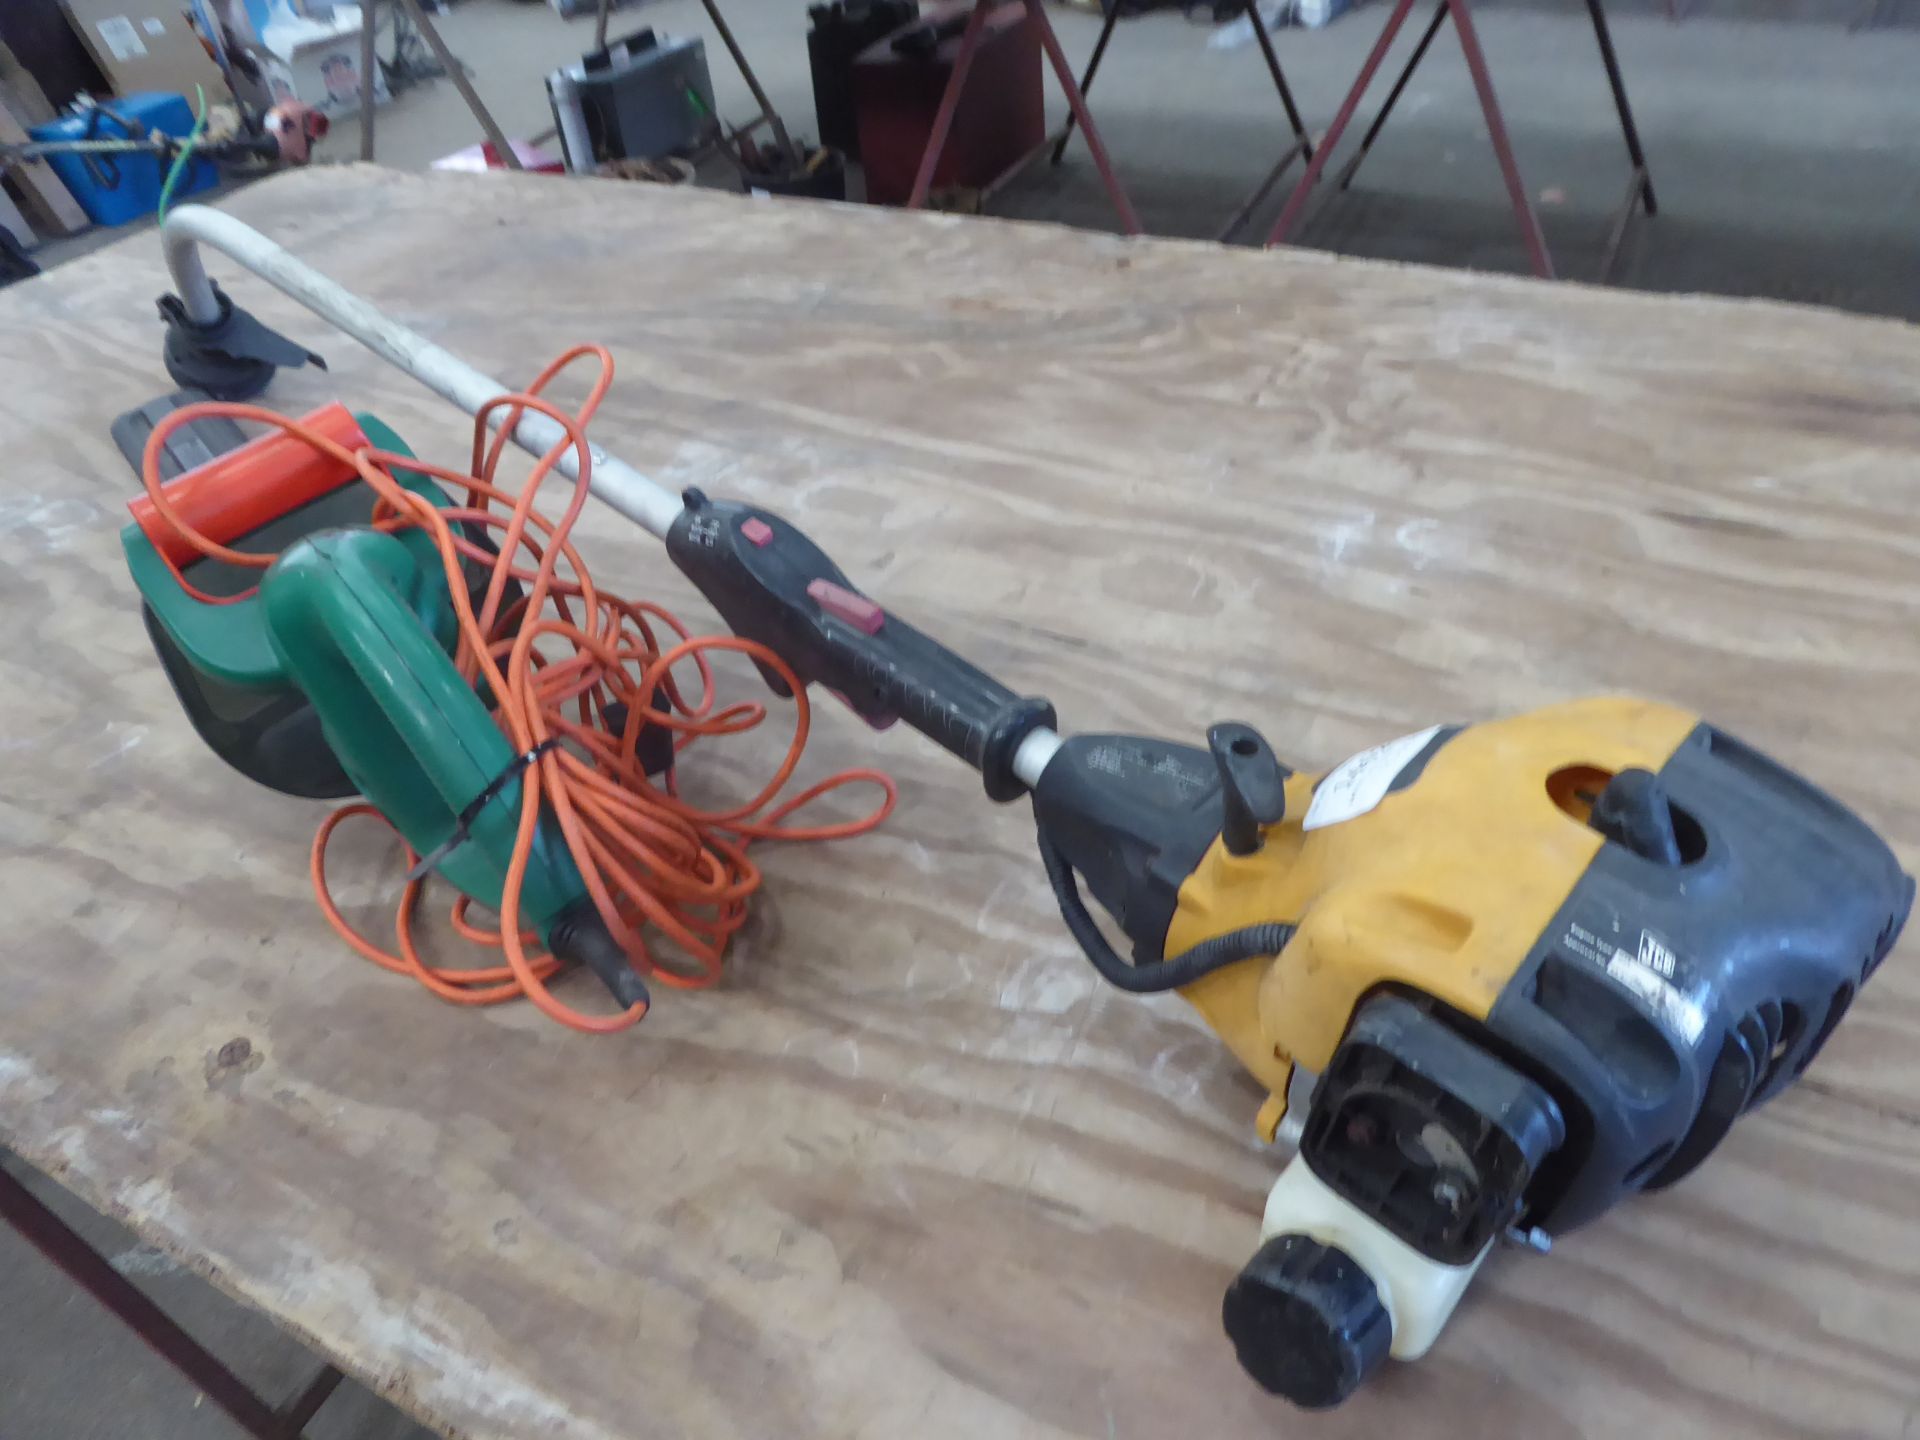 Petrol strimmer and hedge trimmer